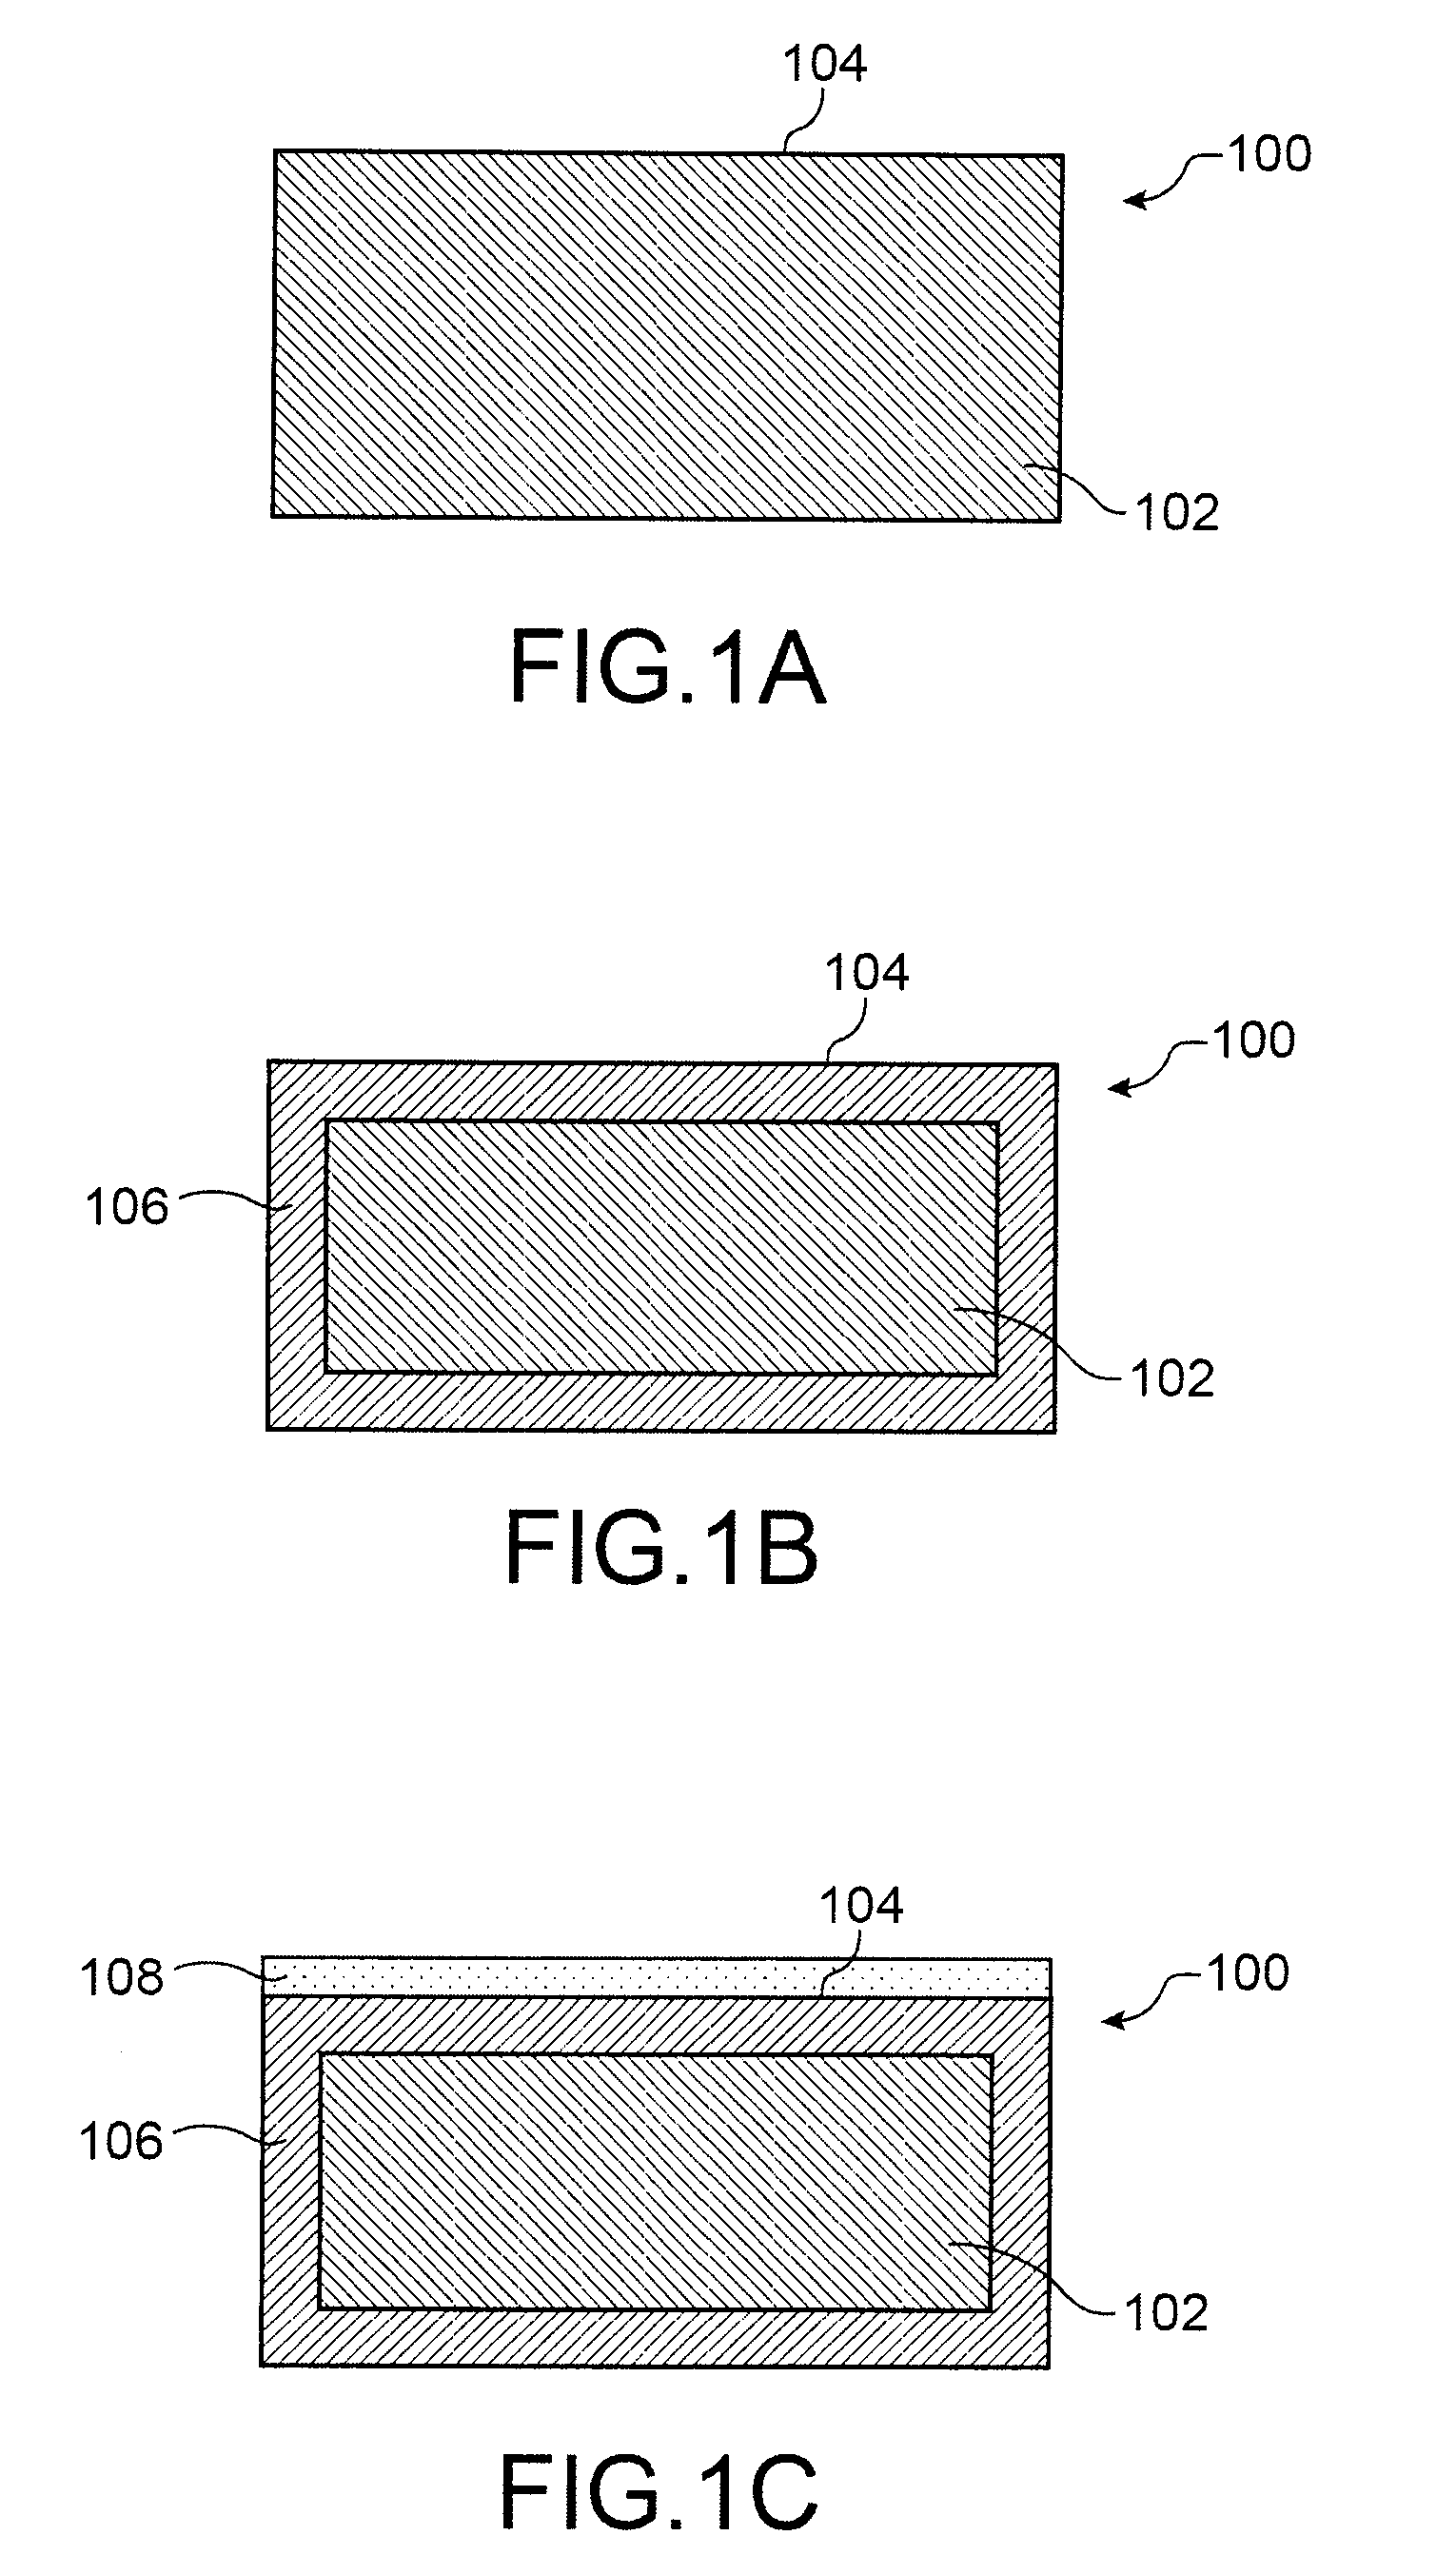 Method of processing a semiconductor substrate by thermal activation of light elements